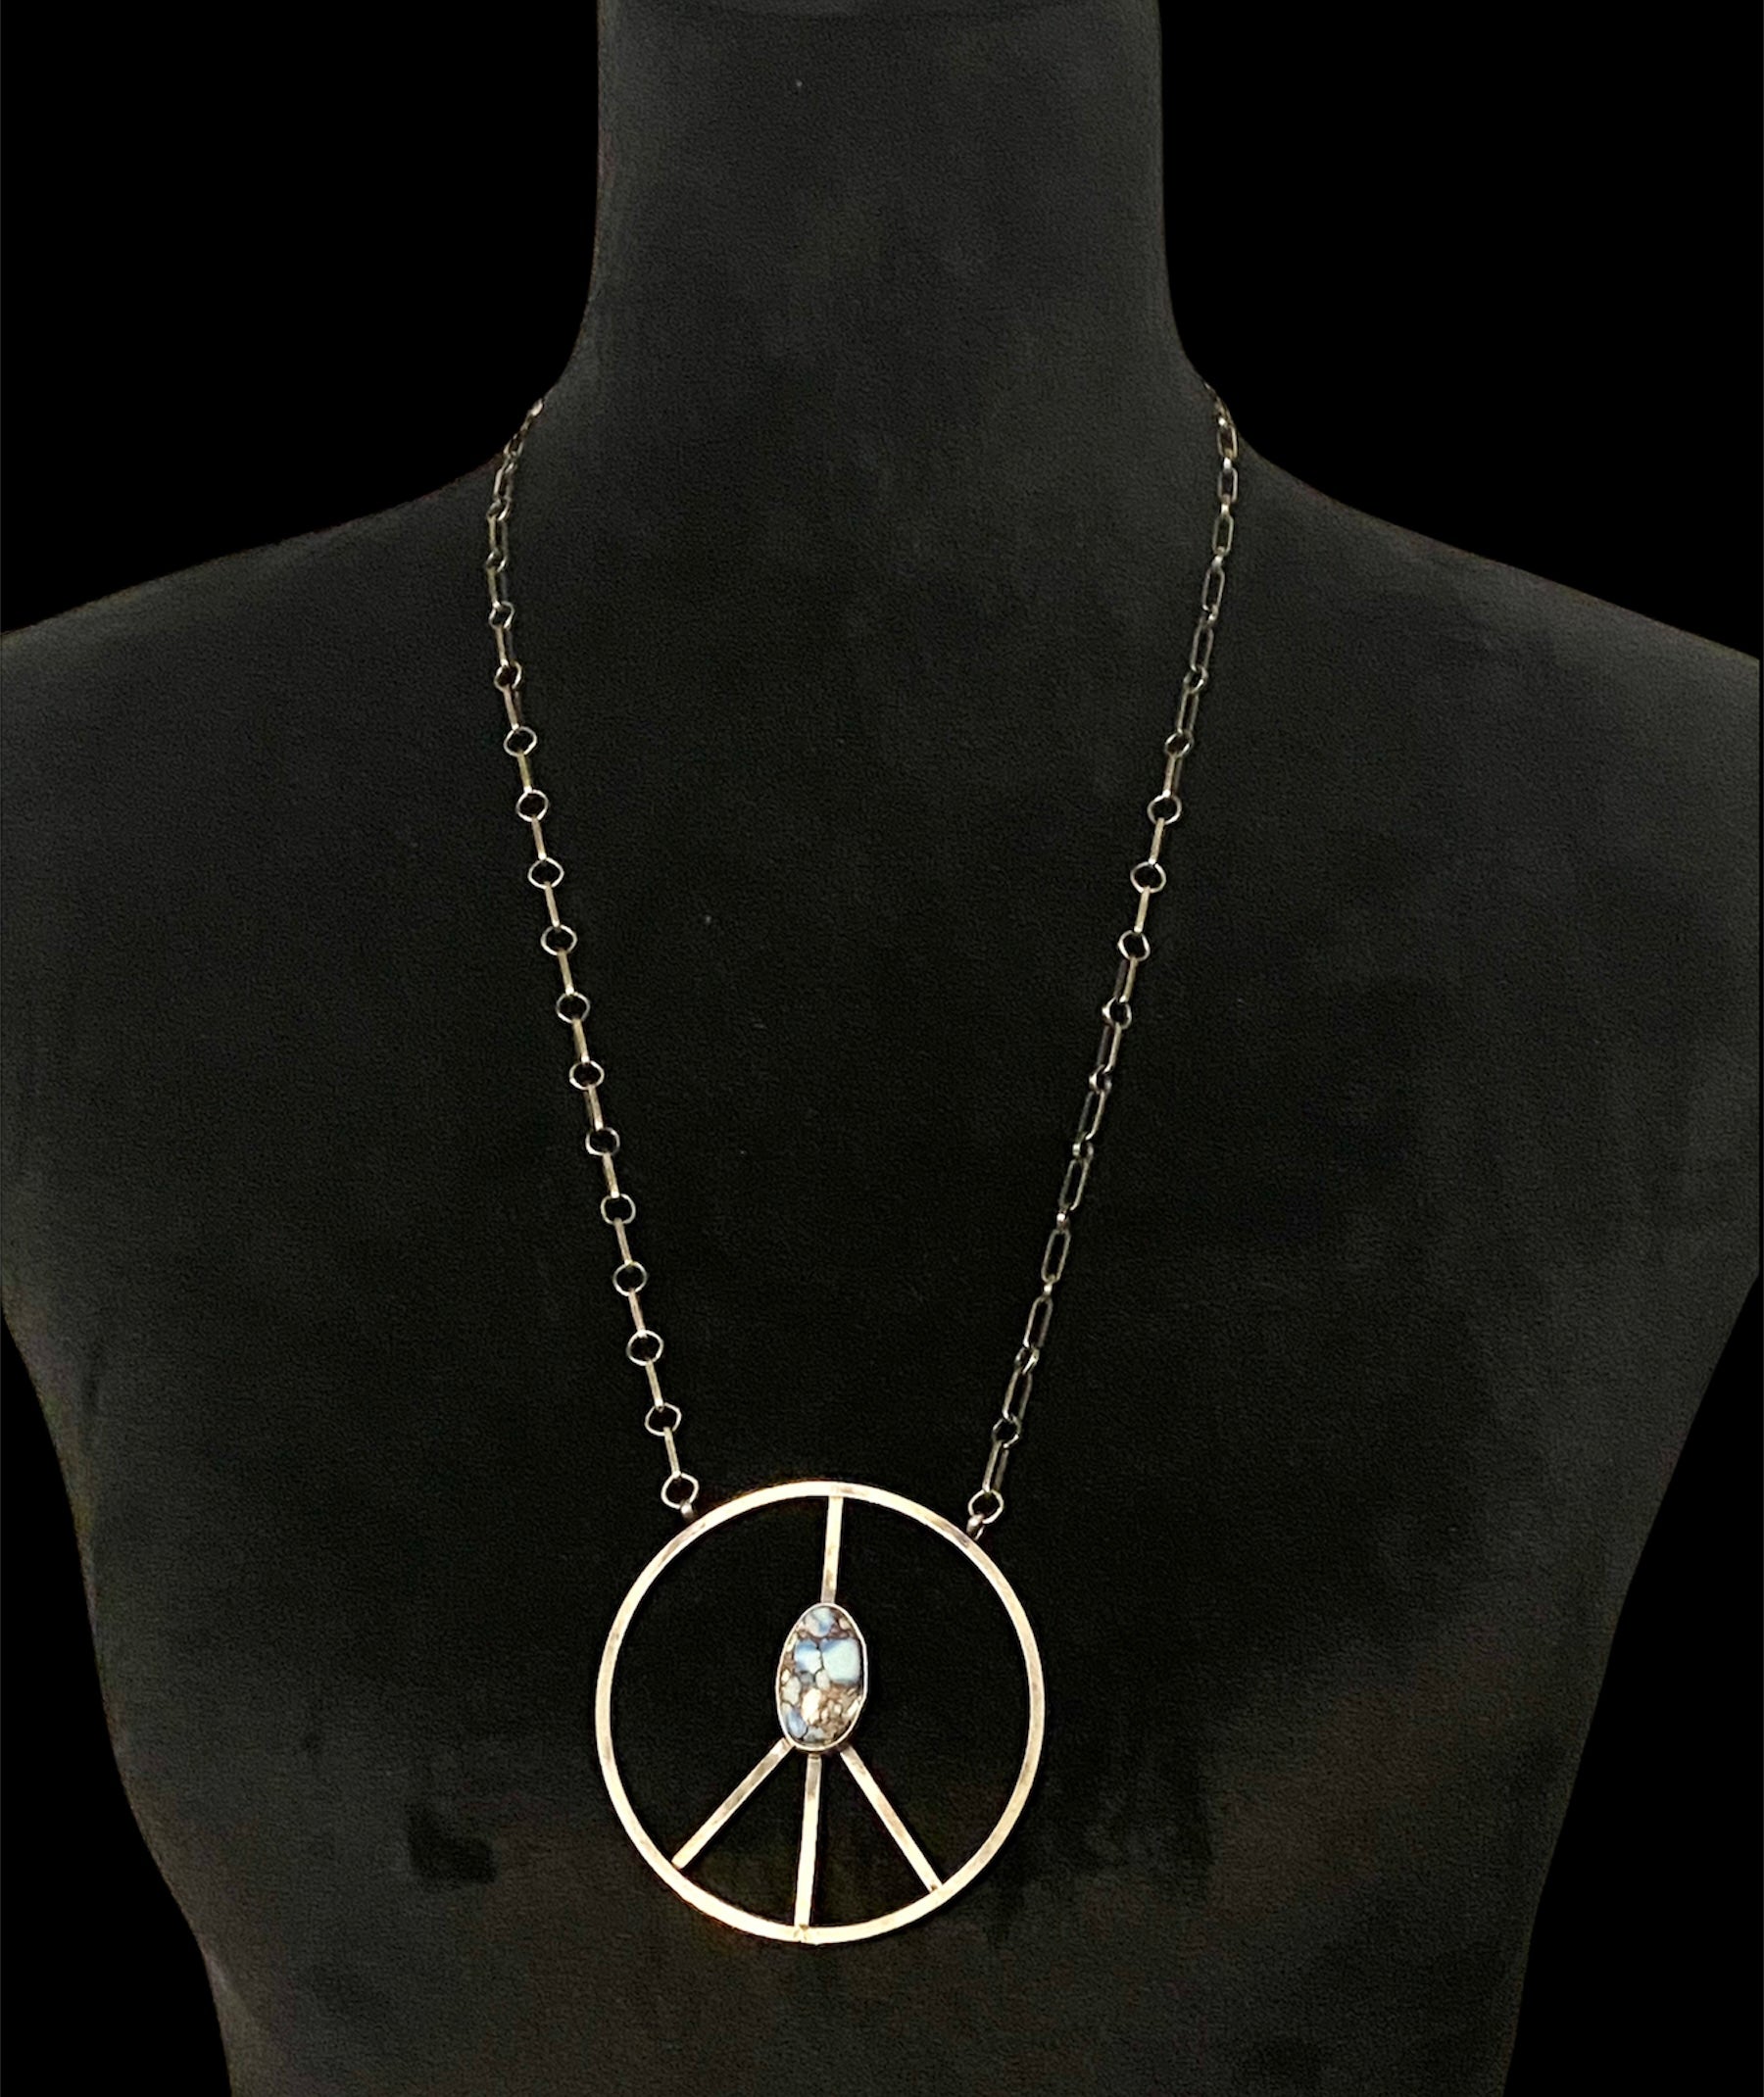 Linda Lincoln Golden Hill’s Turquoise & Sterling Silver Peace Sign Necklace